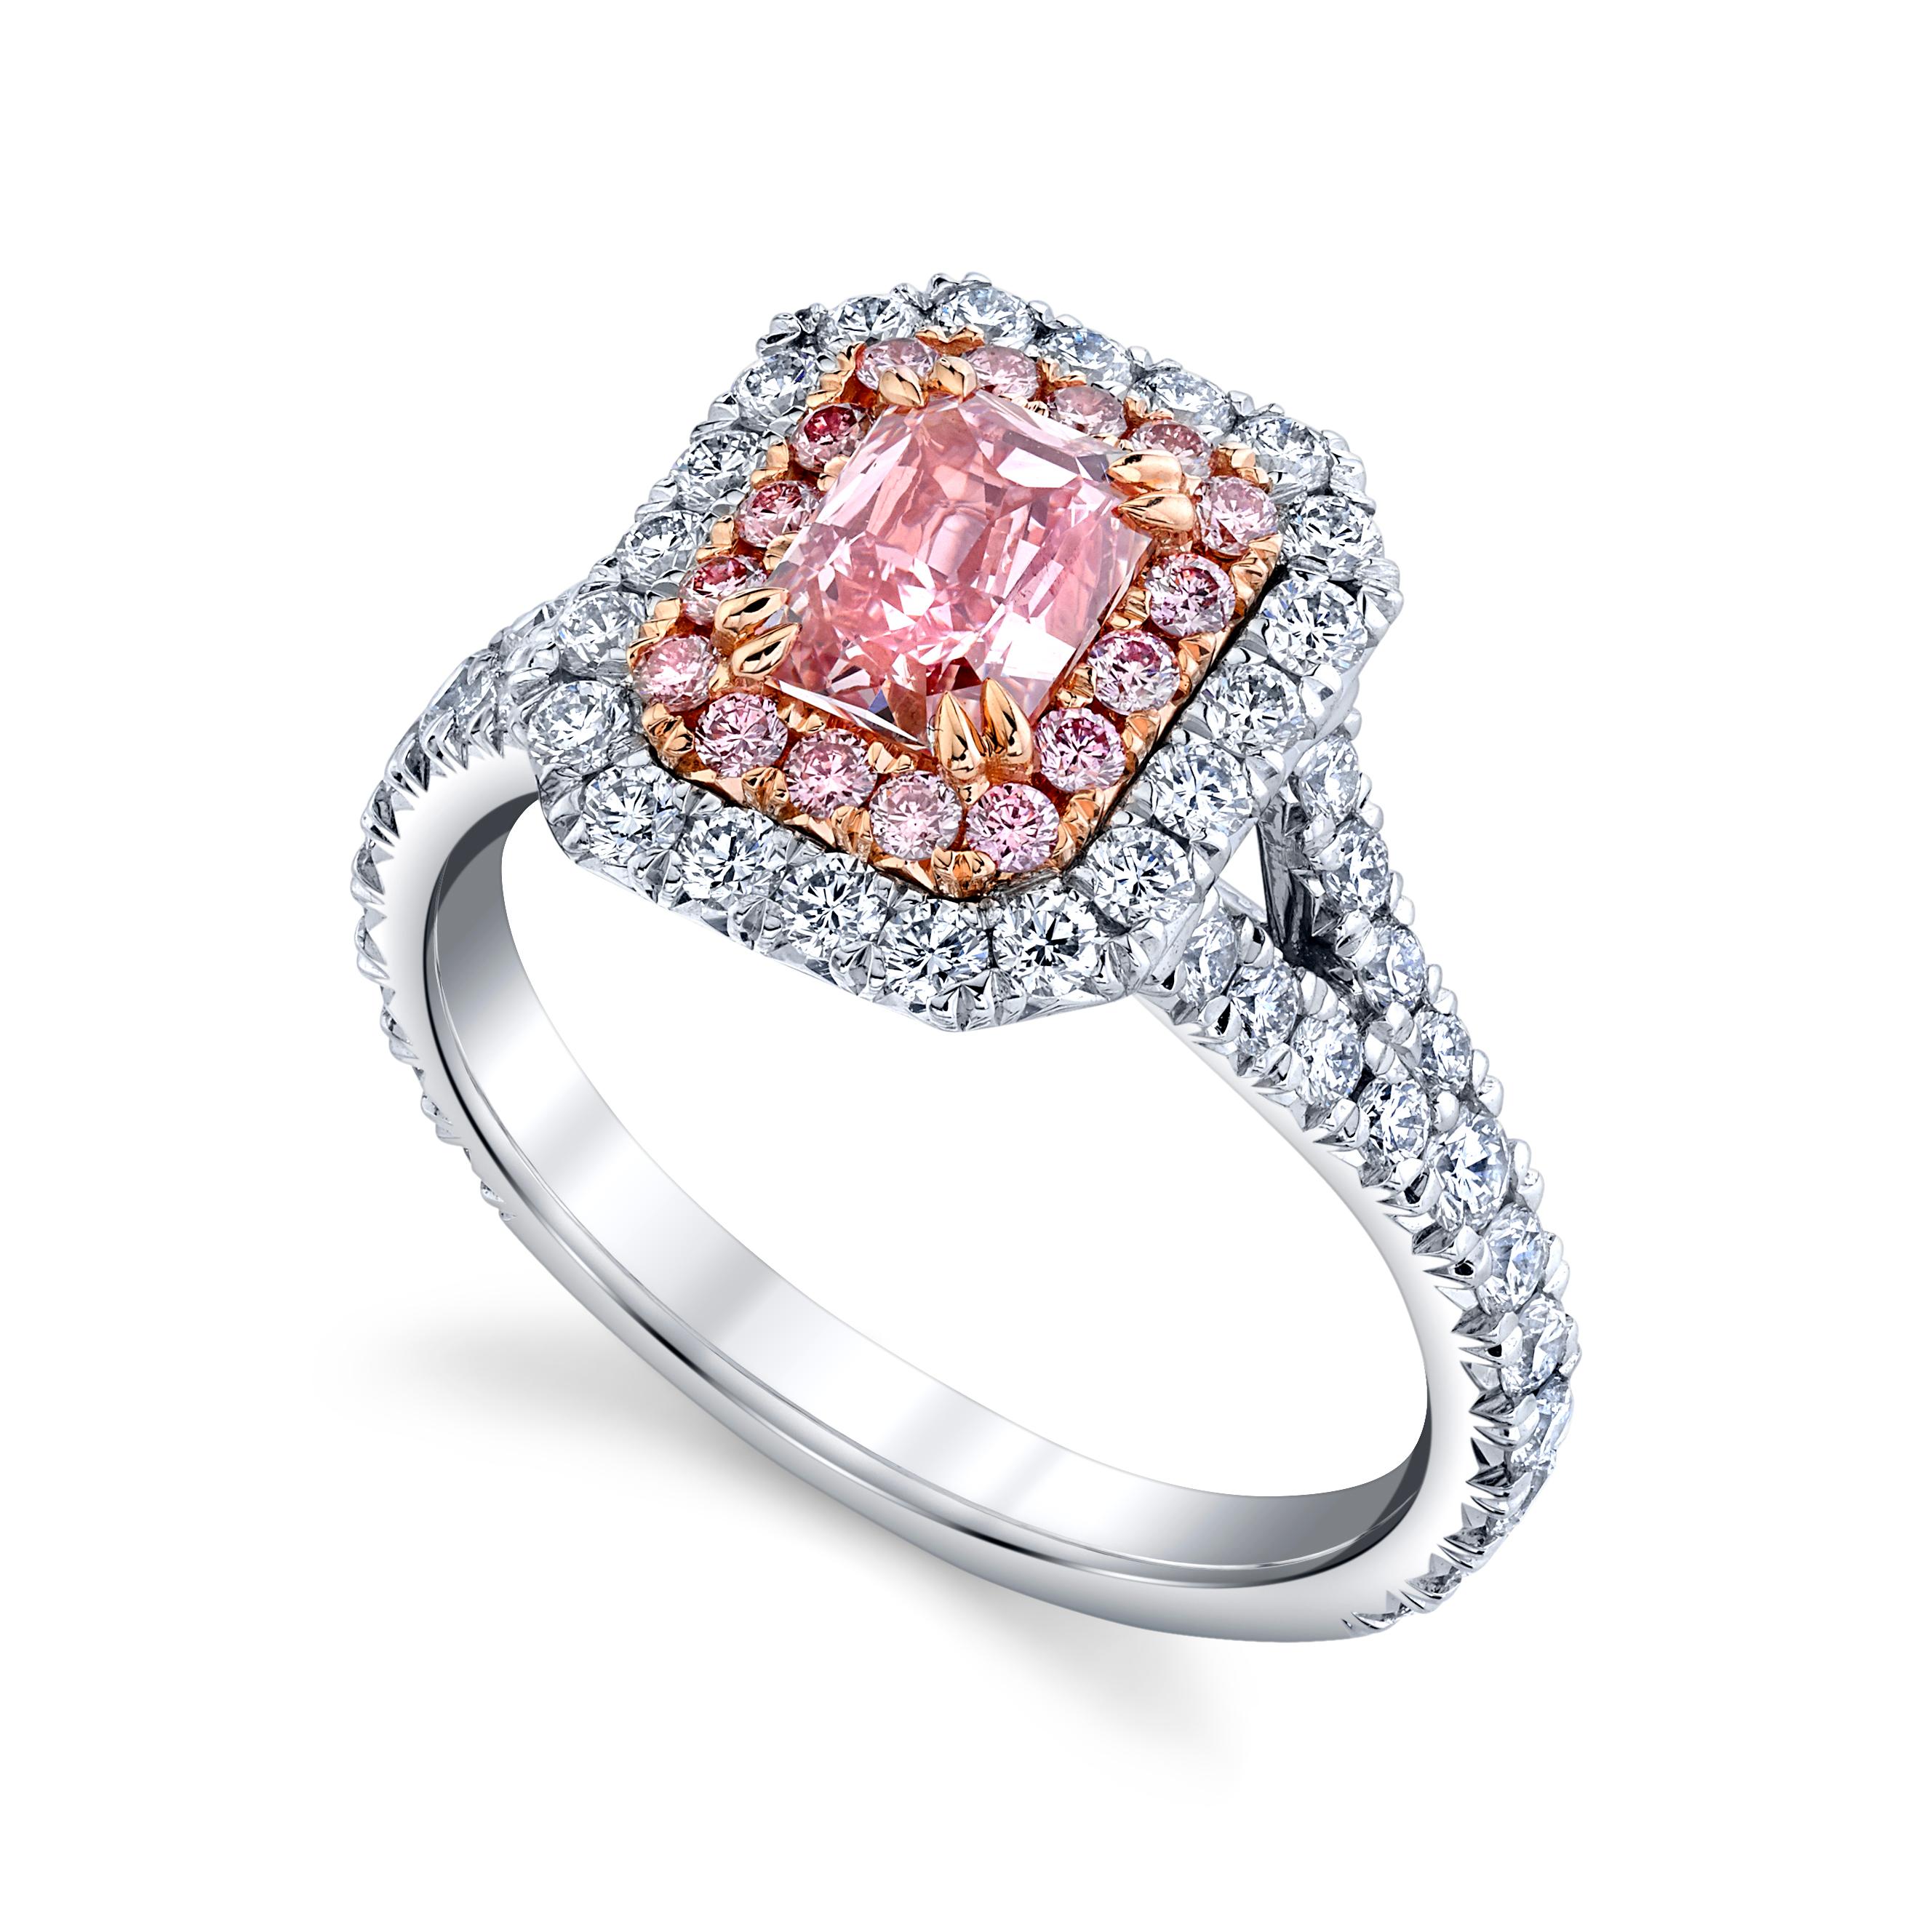 This sexceptional 0.77ct VS2, Radiant Fancy Intense Pink Diamond is set in Platinum and 18K Rose Gold Ring together with a double halo of Pink and colorless diamonds 
16 pcs Radiat Pink Diamonds =0.19cttw 
plus 66 pcs Radiant F/G color